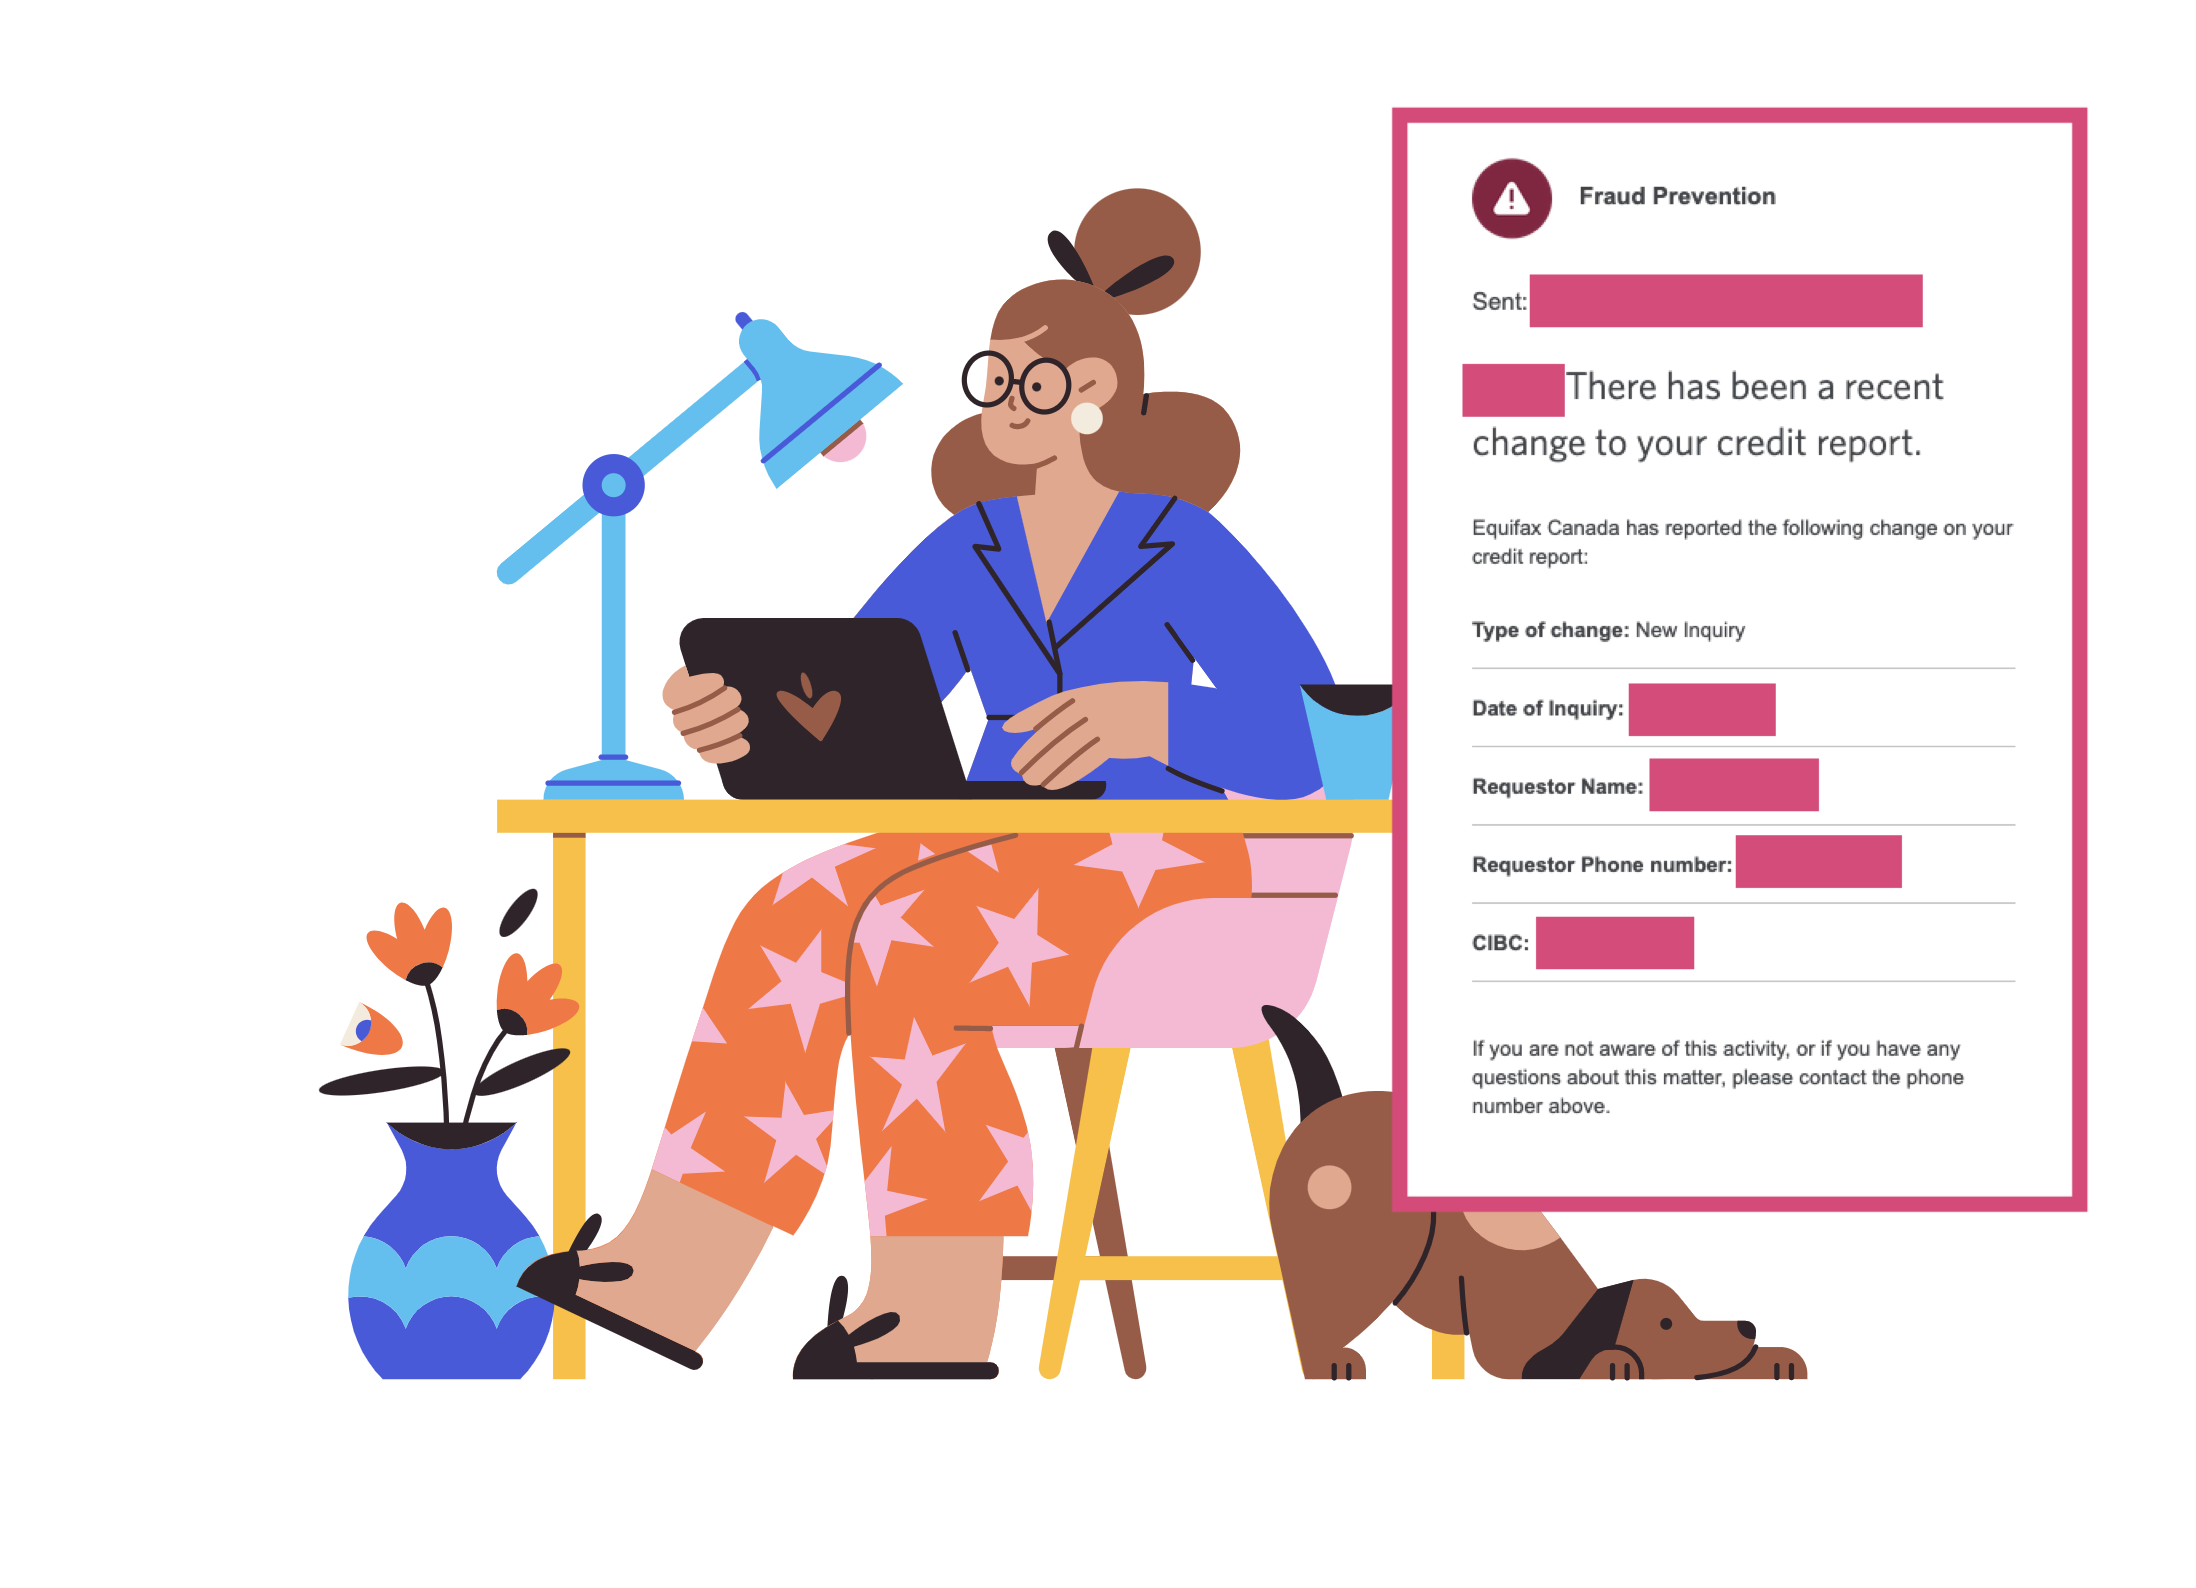 Woman wearing blue and orange with pink stars, looking at a laptop, with a dog next to her, and a screenshot of the credit report change alert.